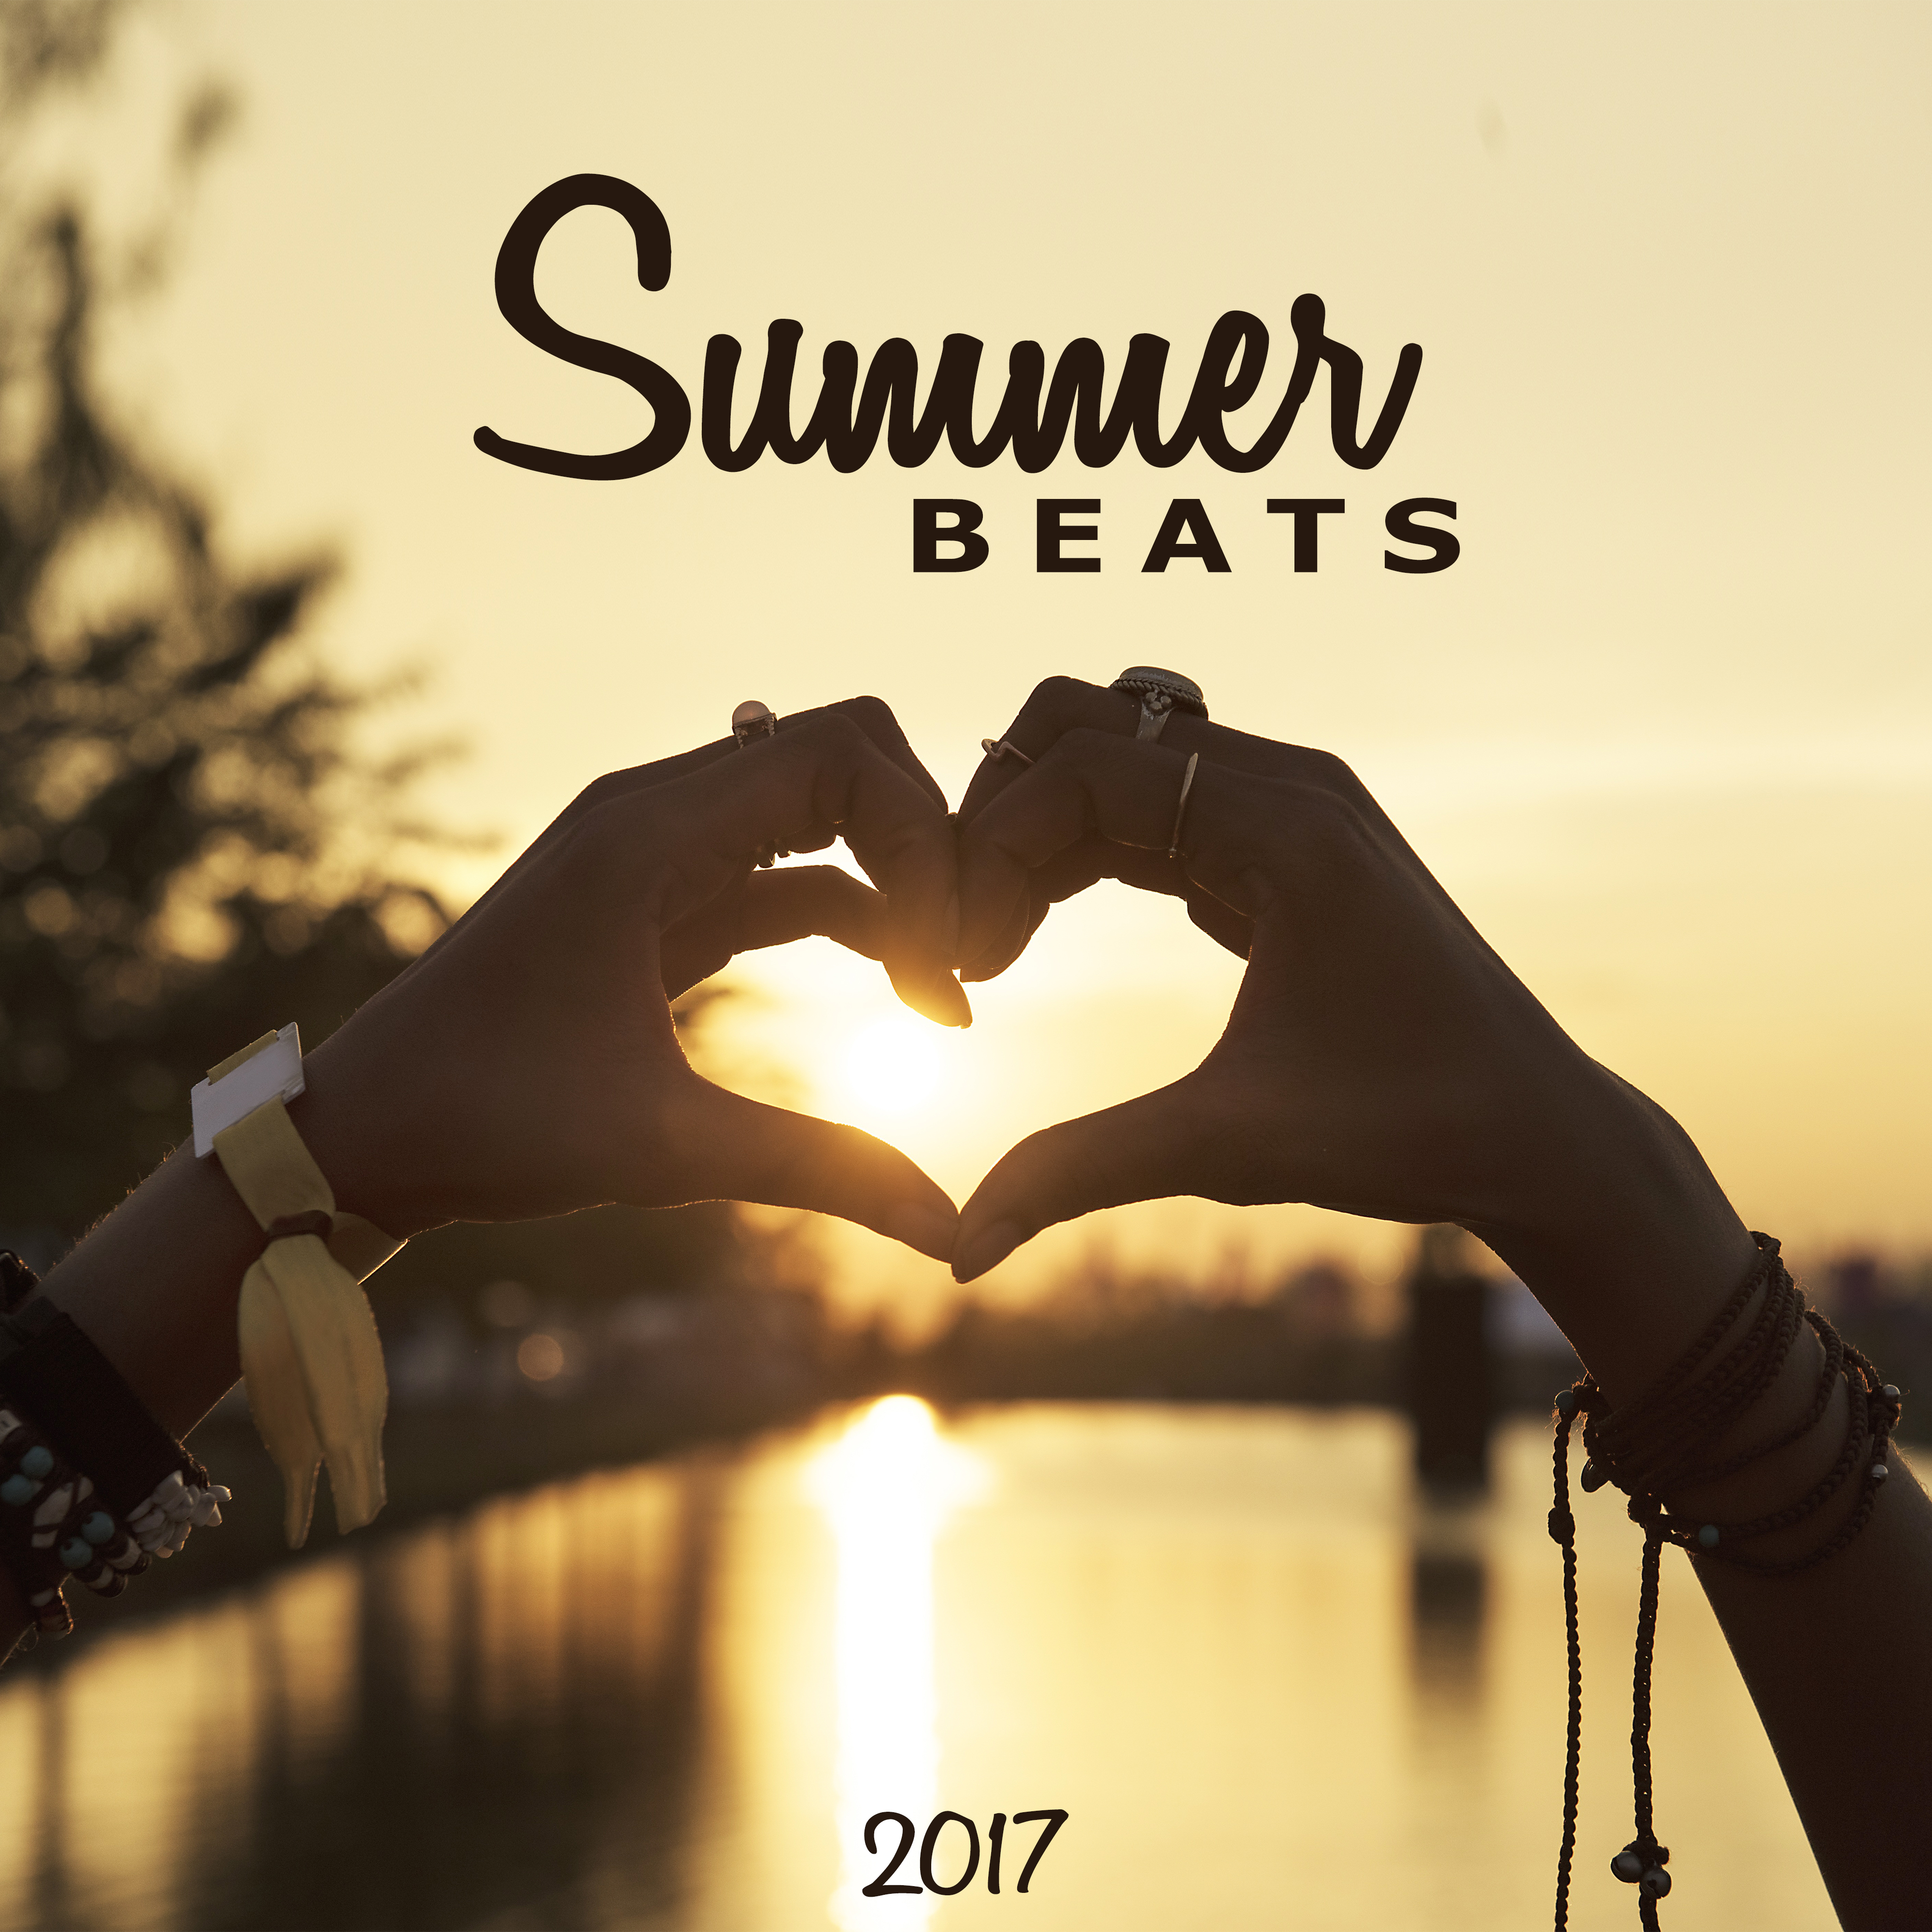 Summer Beats 2017  Holiday Melodies, Relaxing Time, Beach House Lounge, Summer 2017, Chill Out Music